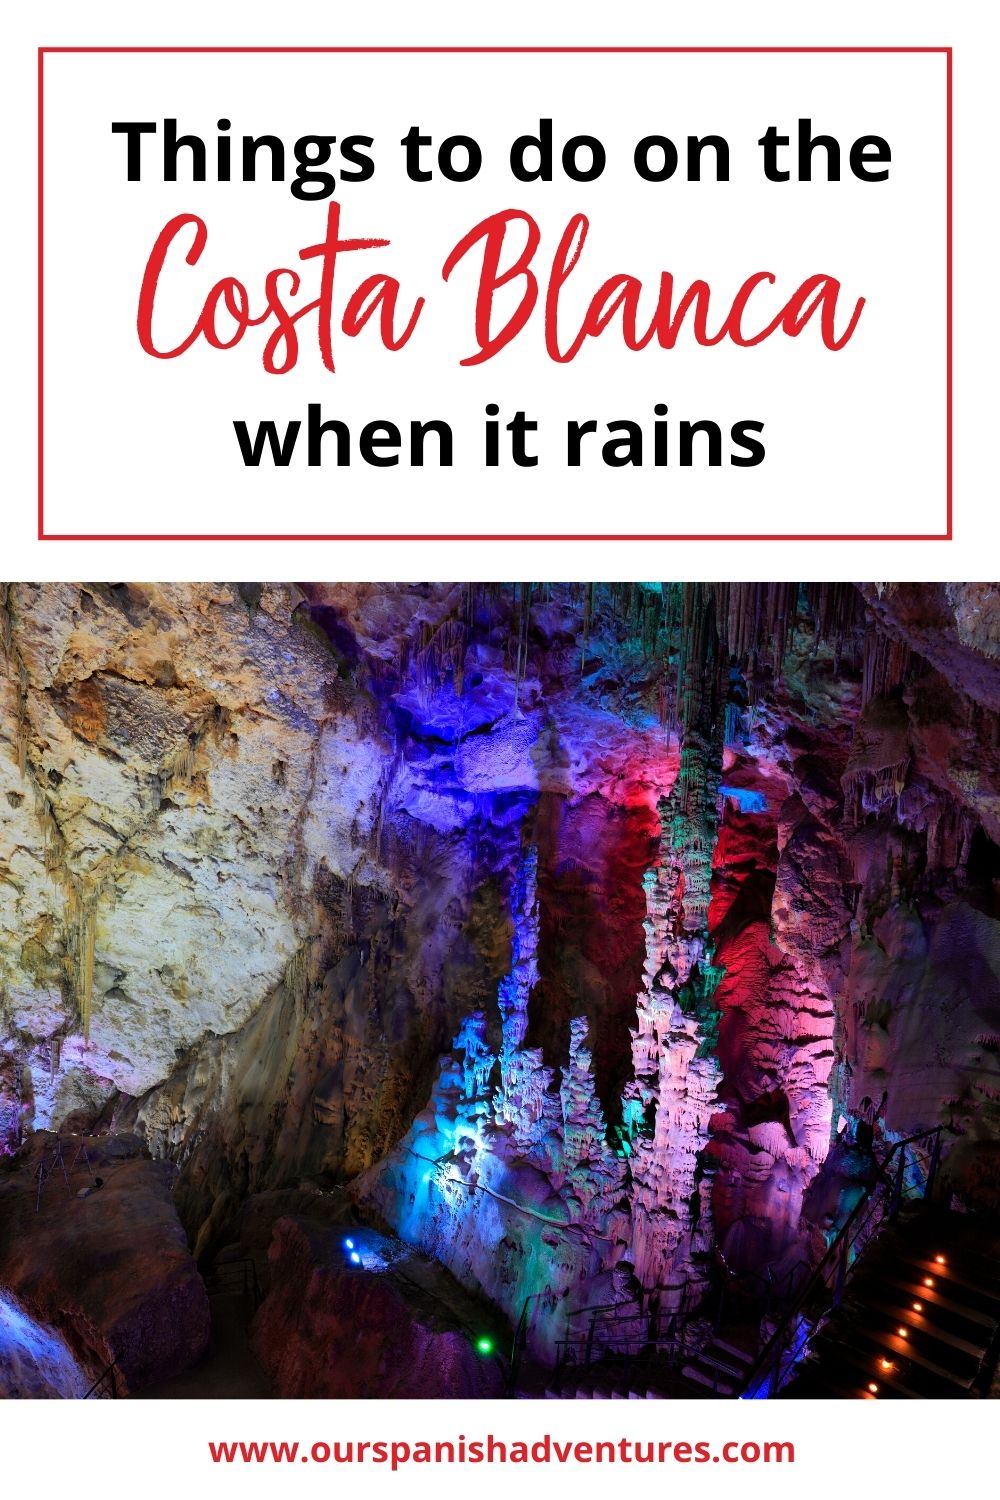 Things to do on the Costa Blanca when it rains | Our Spanish Adventures